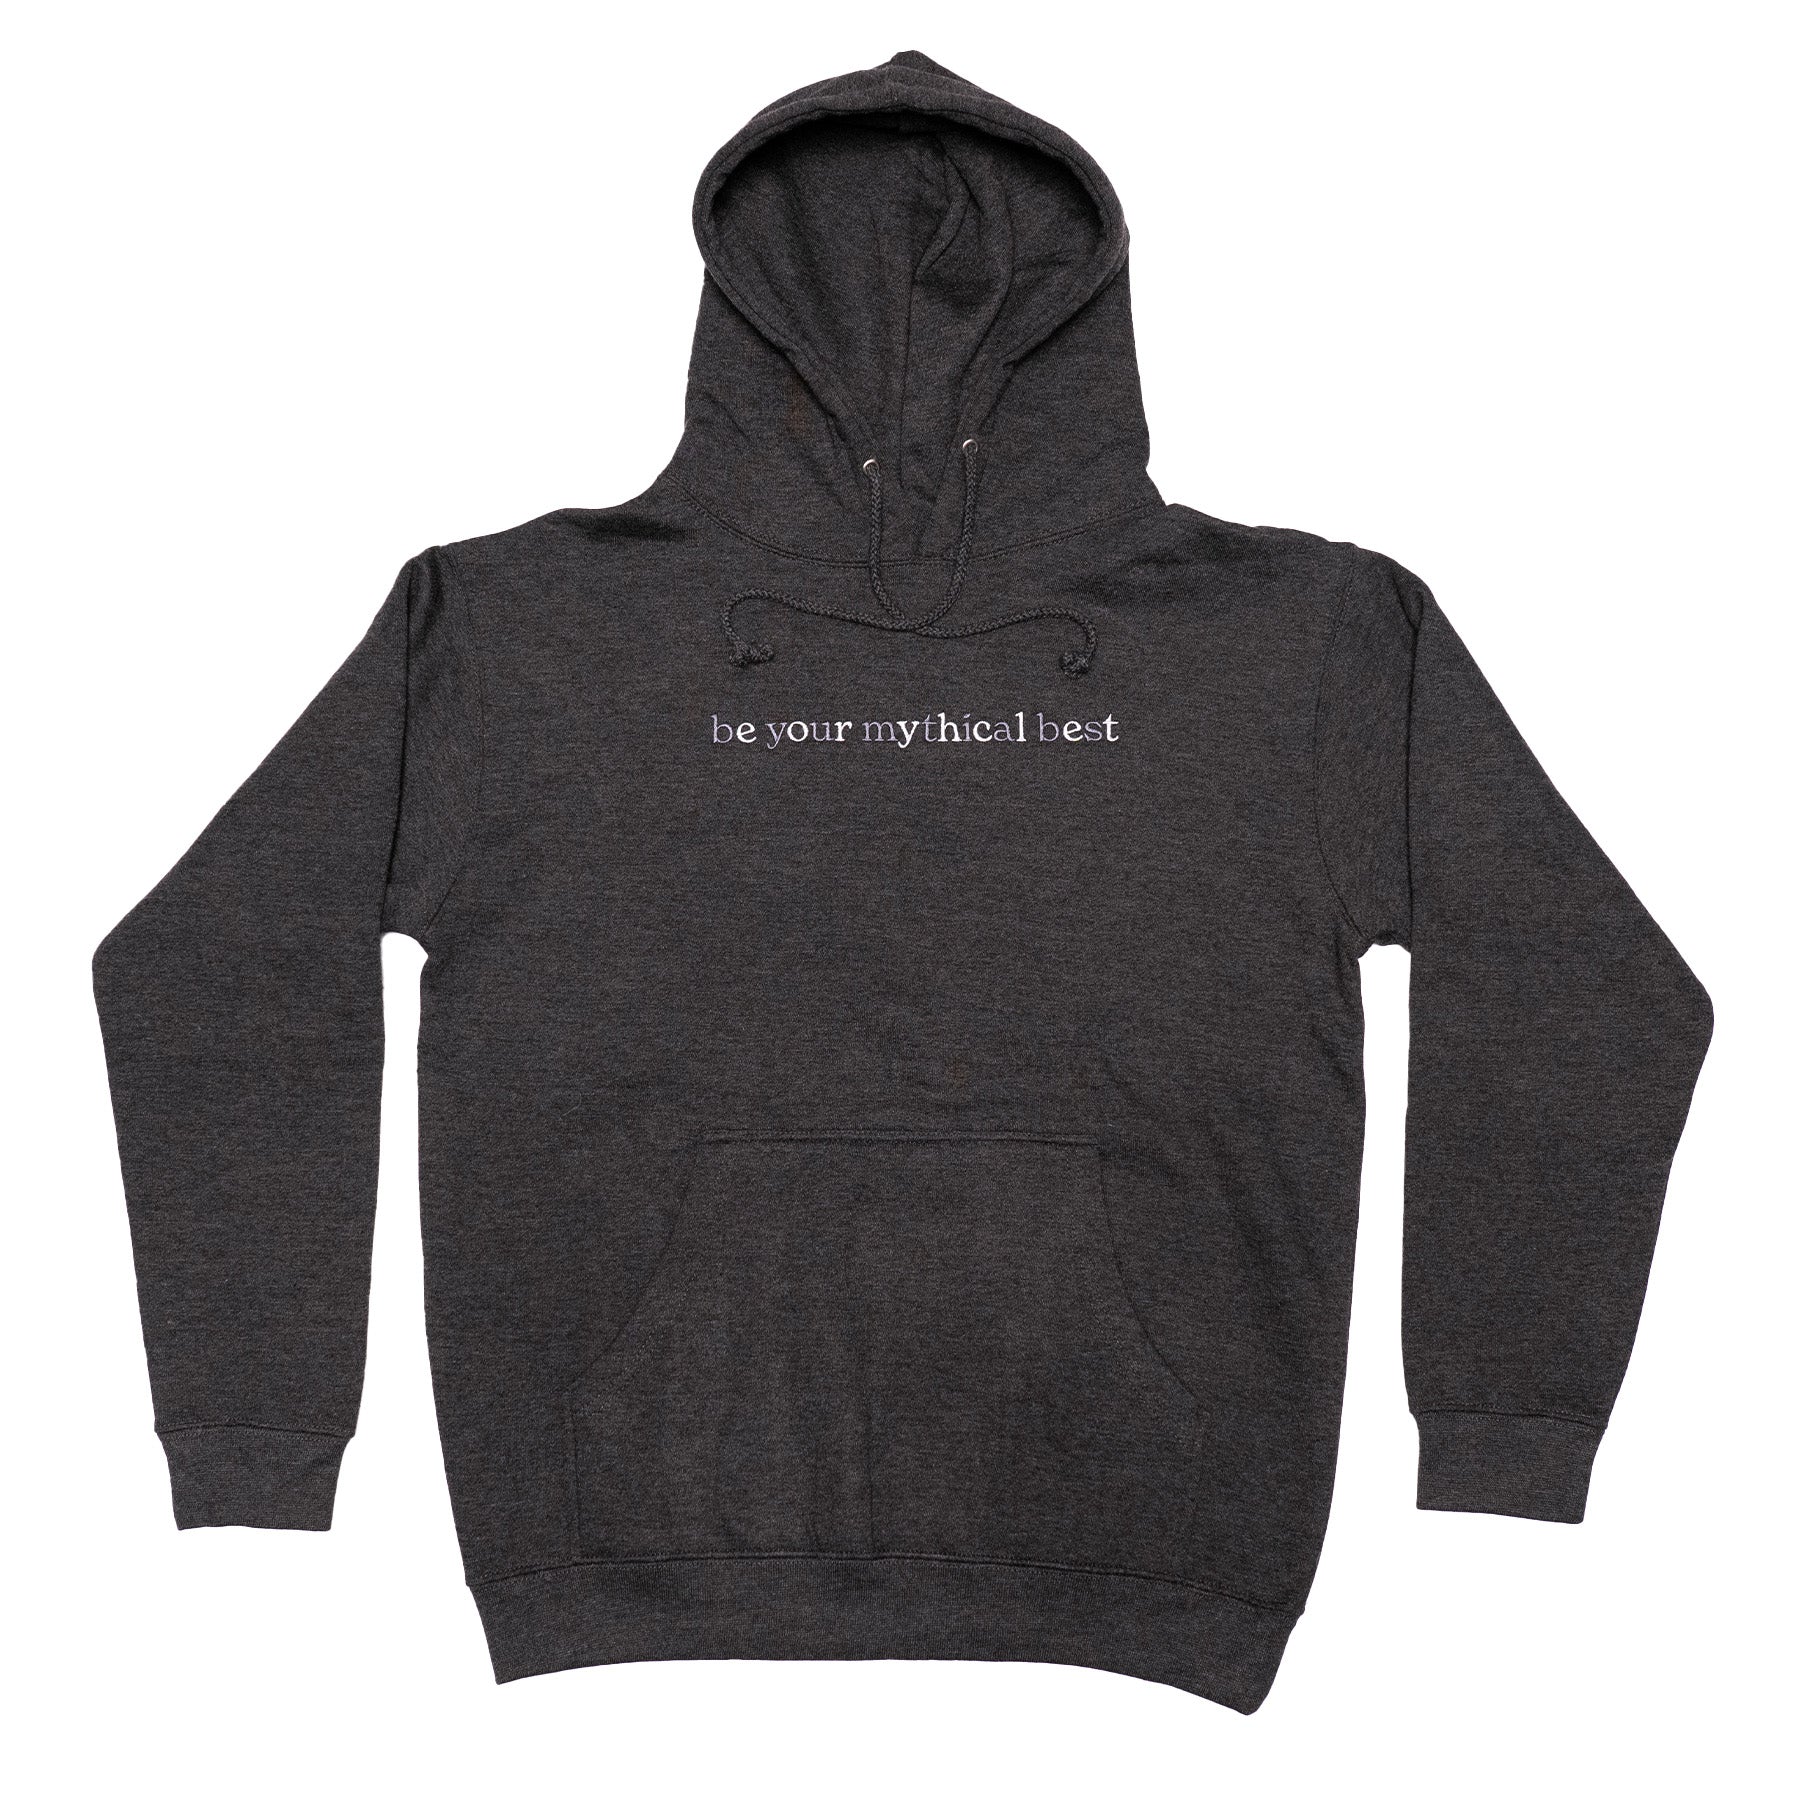 BYMB Embroidered Hoodie (Charcoal Heather)